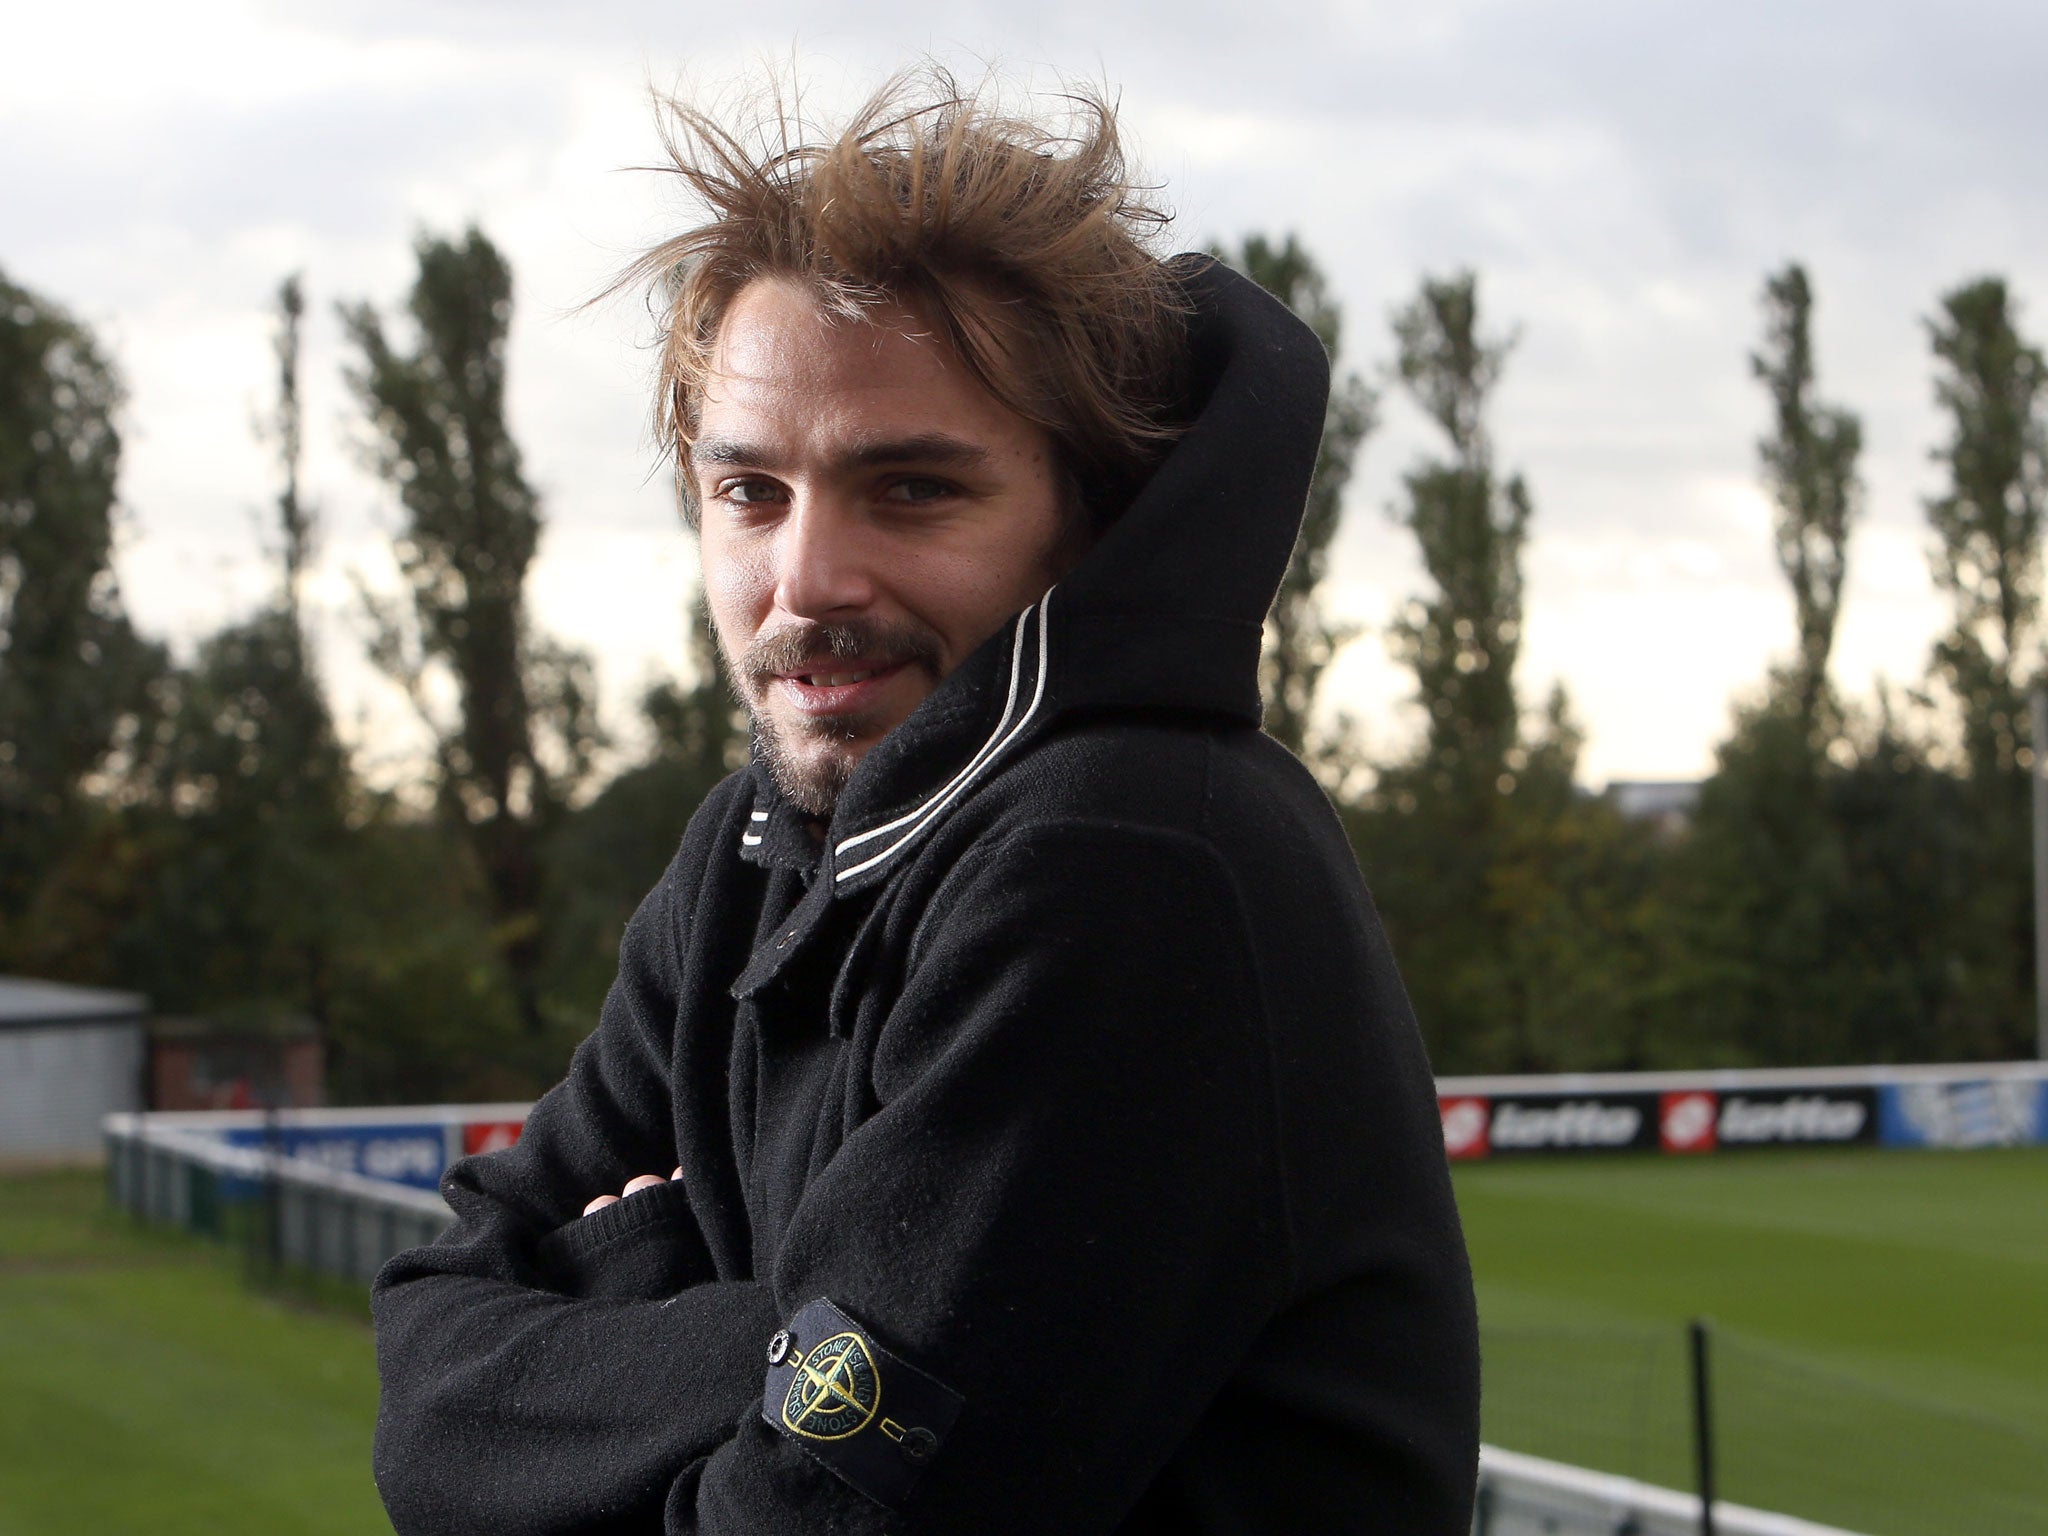 'After Kiev, QPR is more relaxed and trustworthy,' says Niko Kranjcar